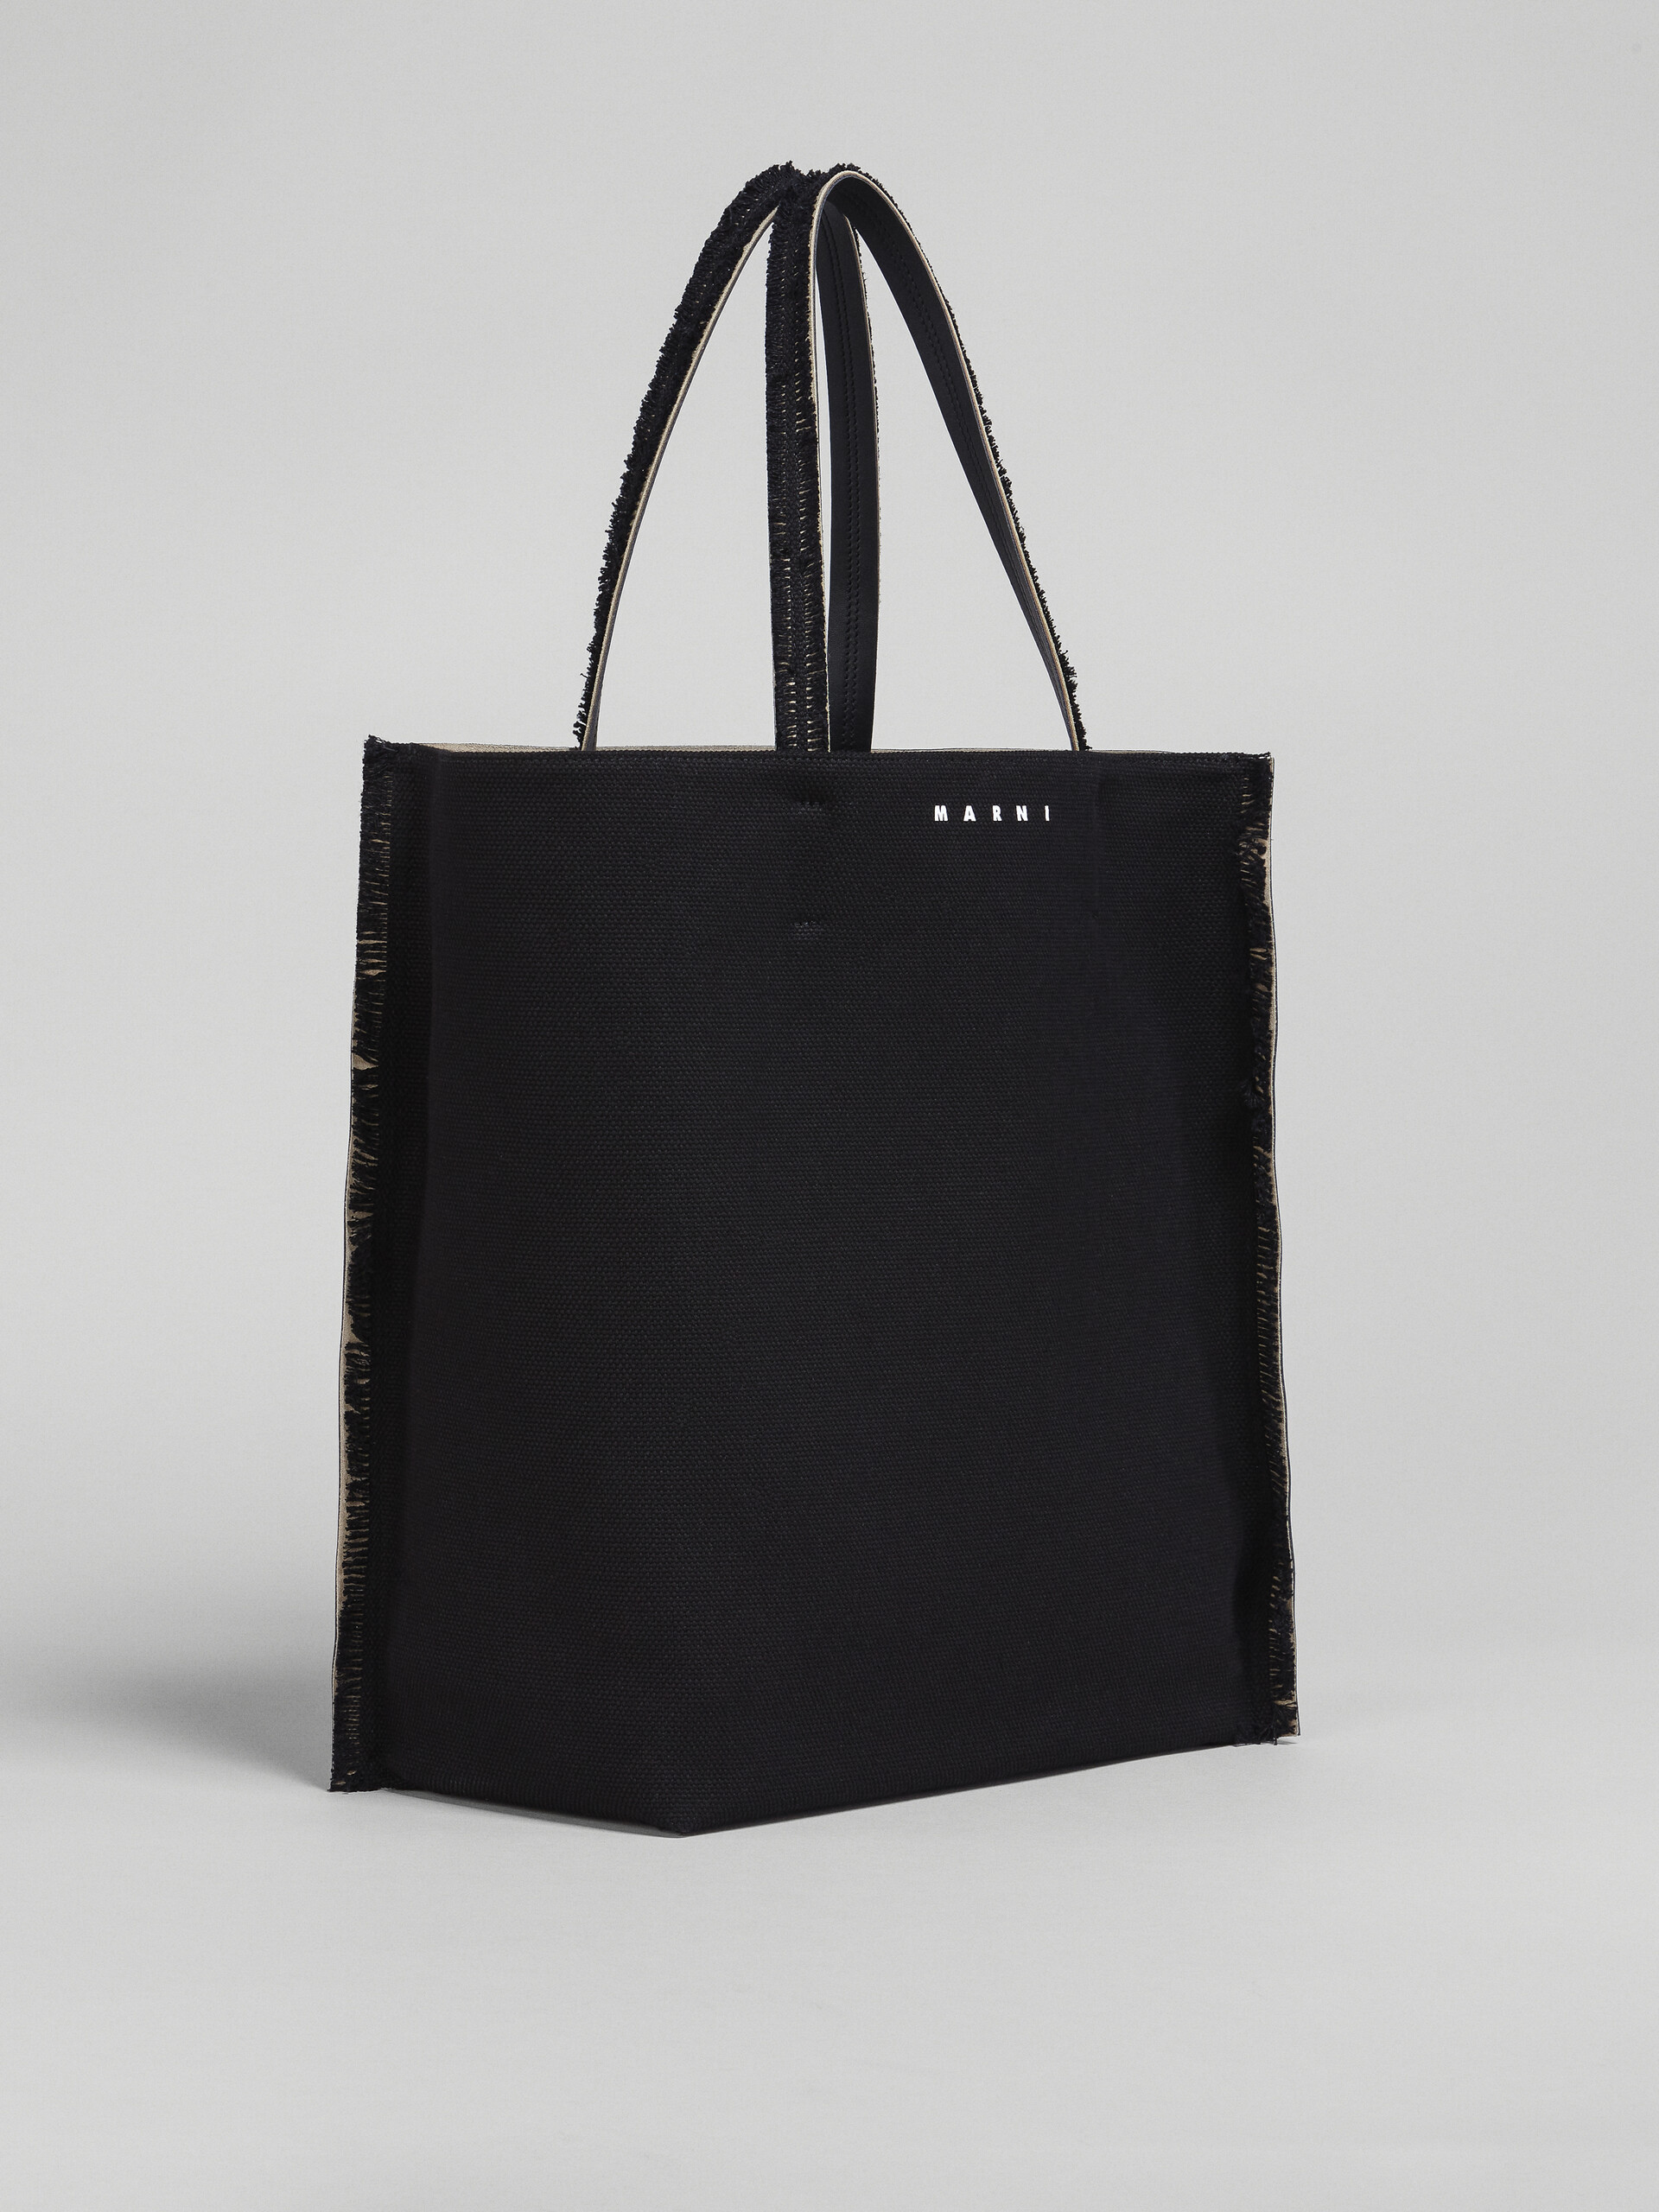 Black leather and canvas MUSEO SOFT shopping bag - Shopping Bags - Image 6